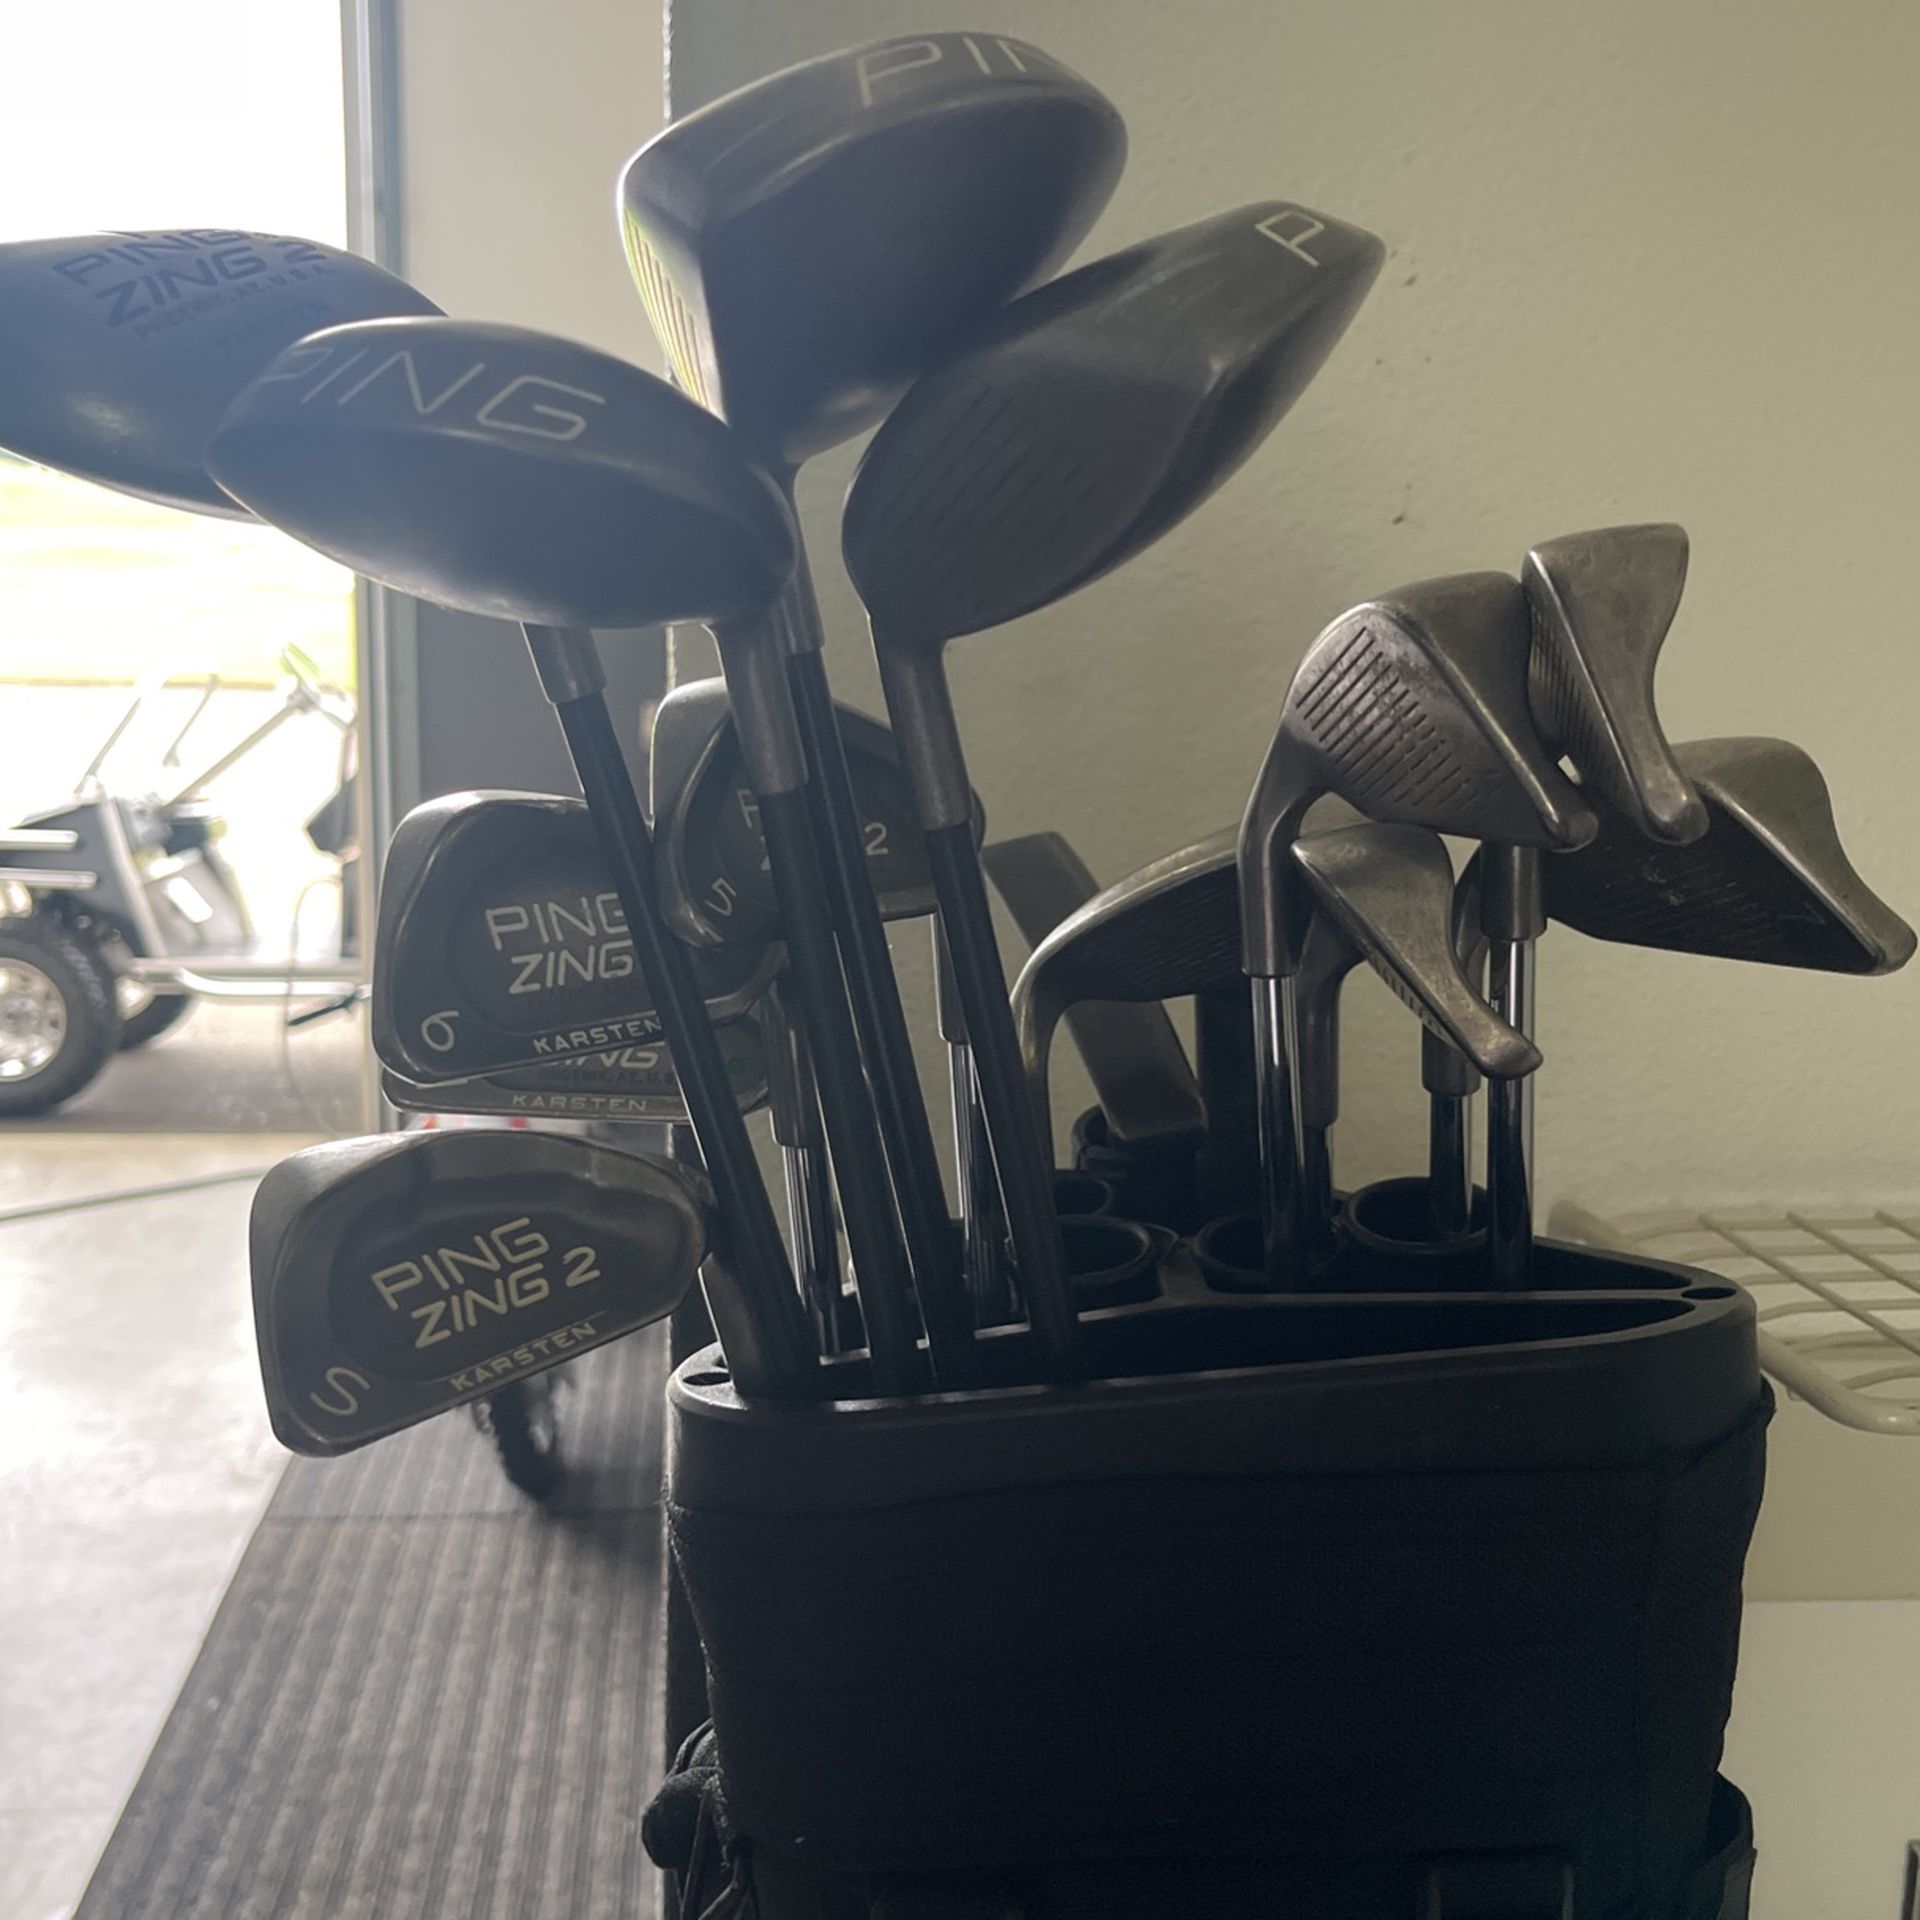 Ping Zing Clubs, And Bags